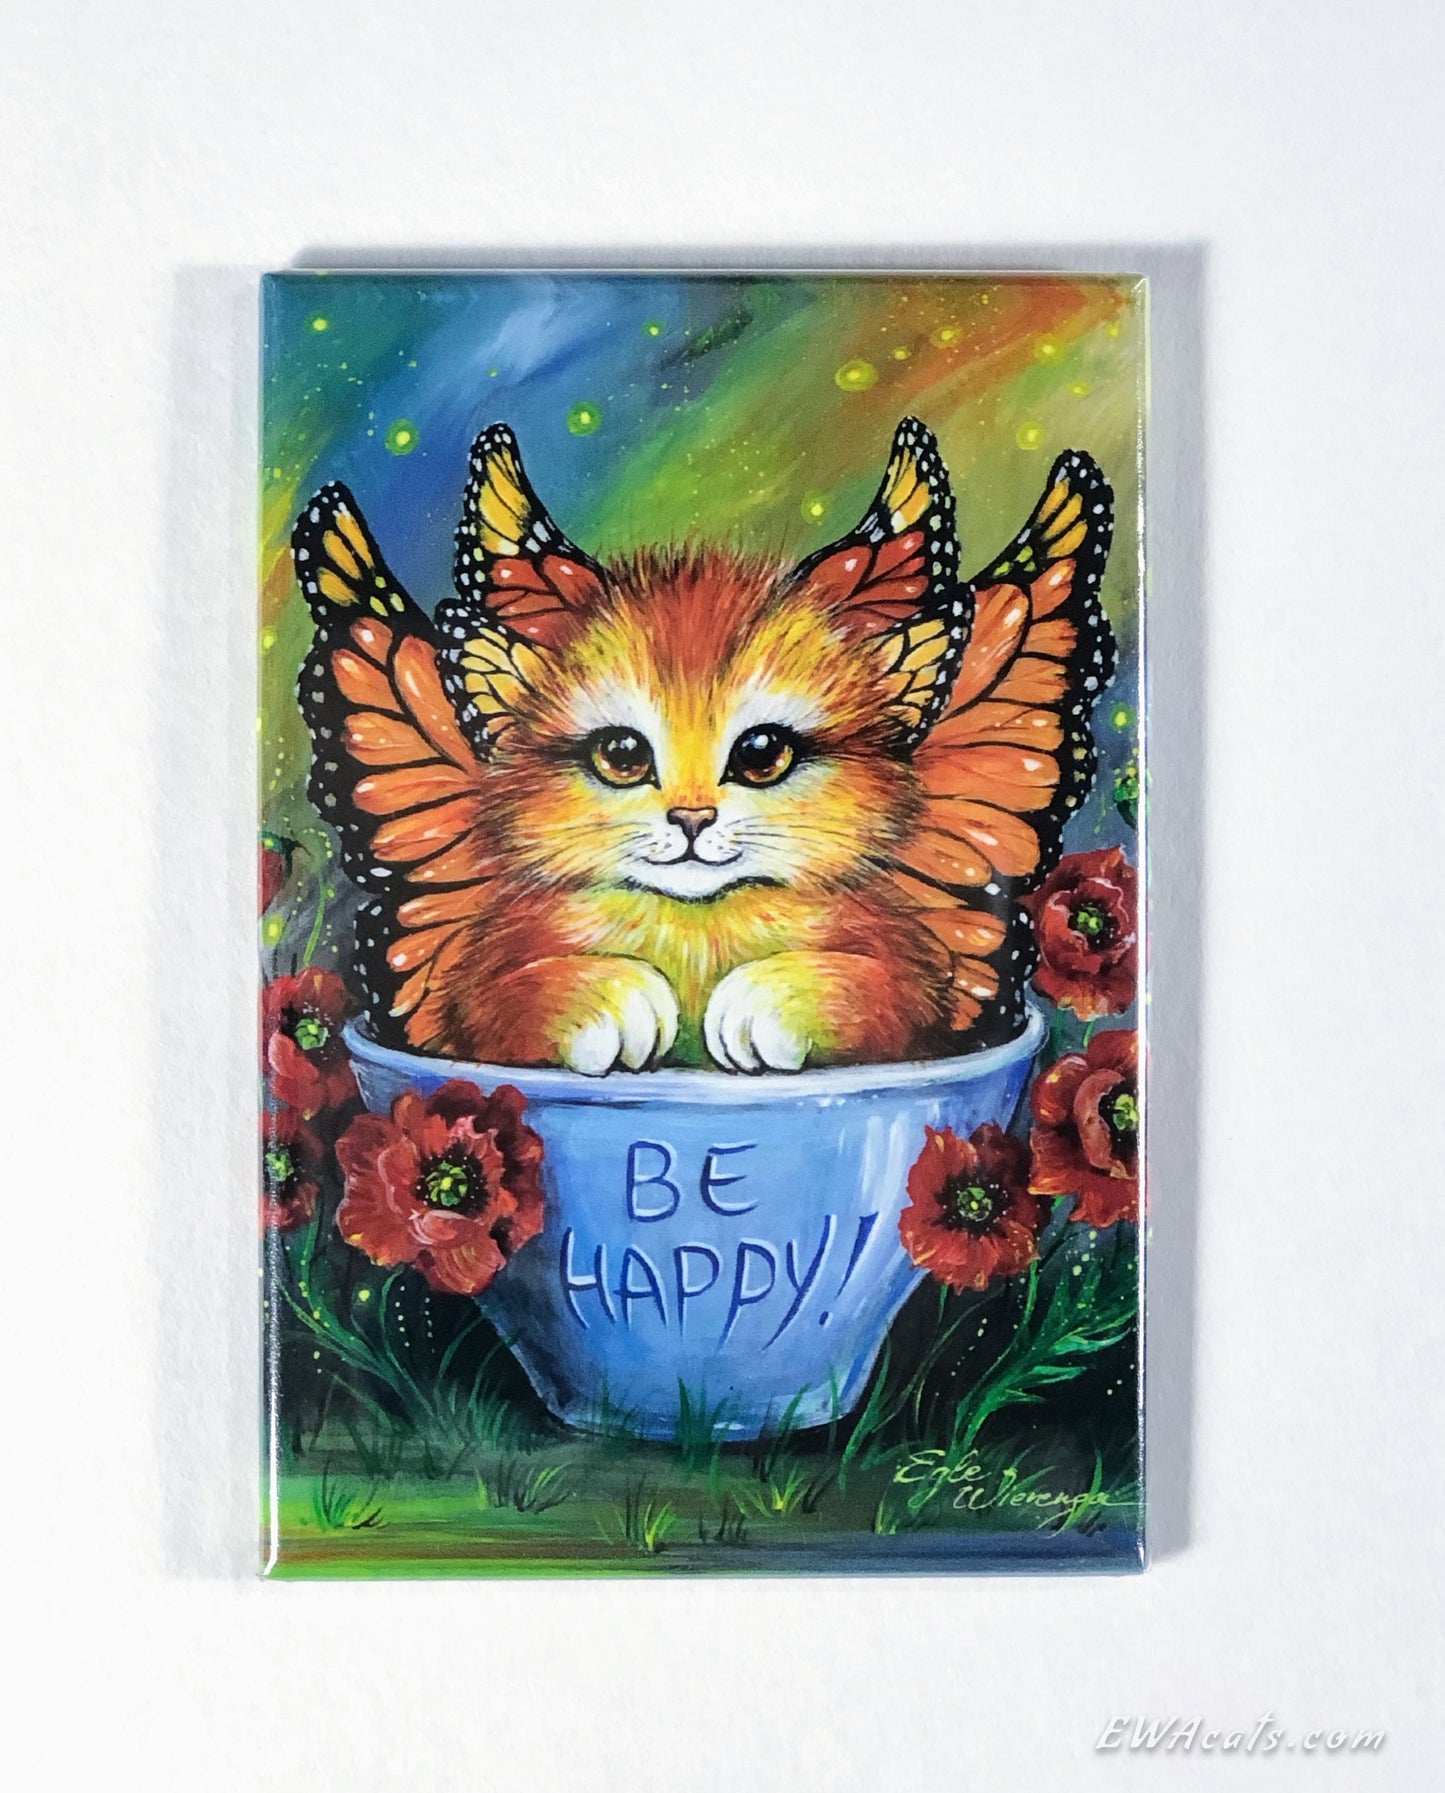 MAGNET 2"x 3" Rectangle "Be Happy"